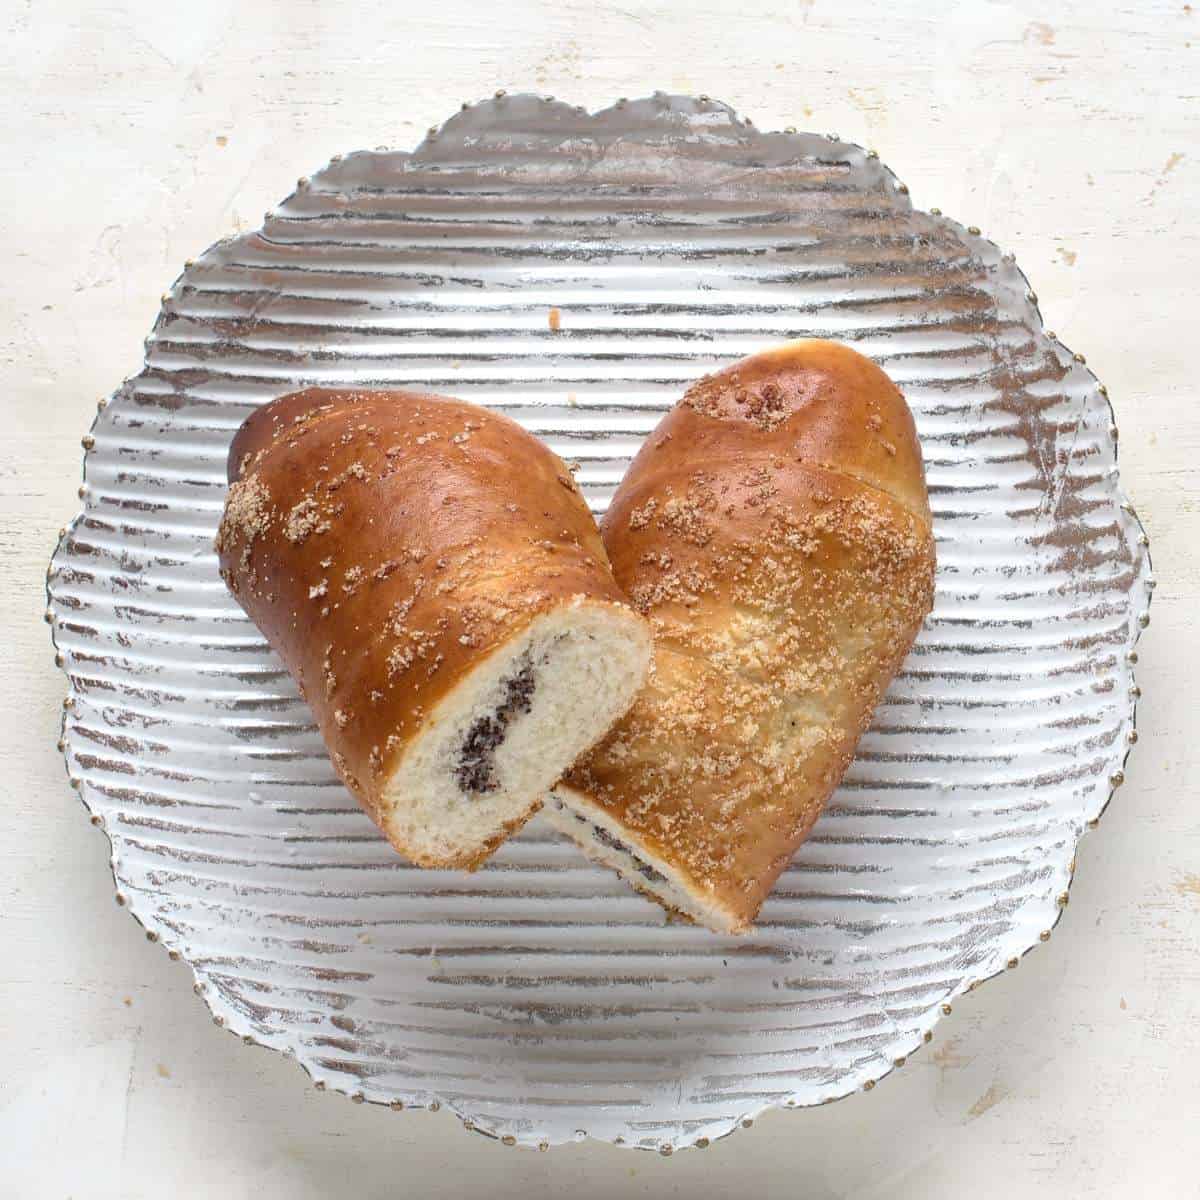 Jestedka pastry roll filled with poppy seed, served on a plate.